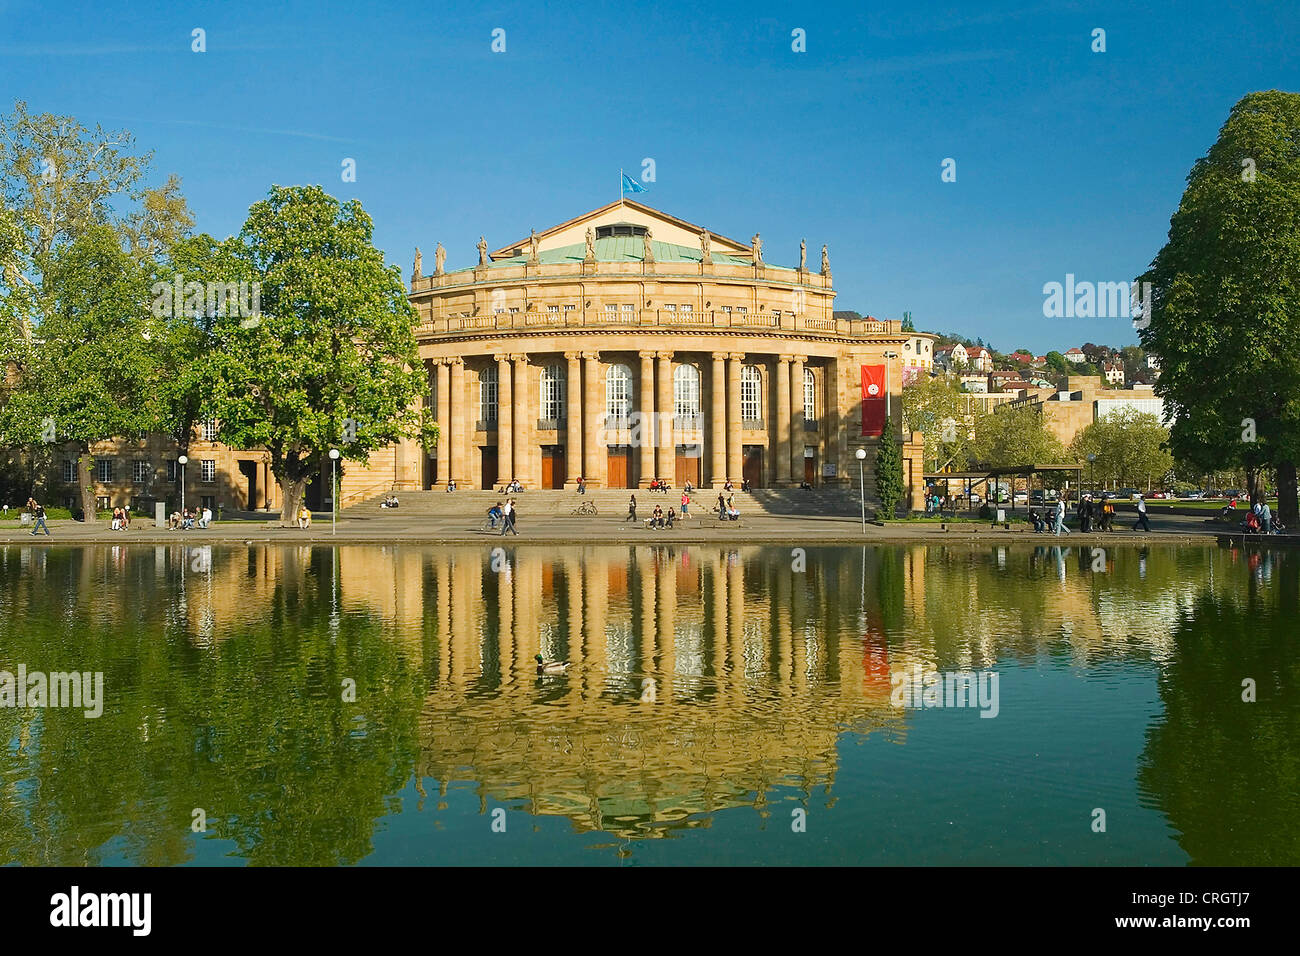 Grosses Theater High Resolution Stock Photography and Images - Alamy